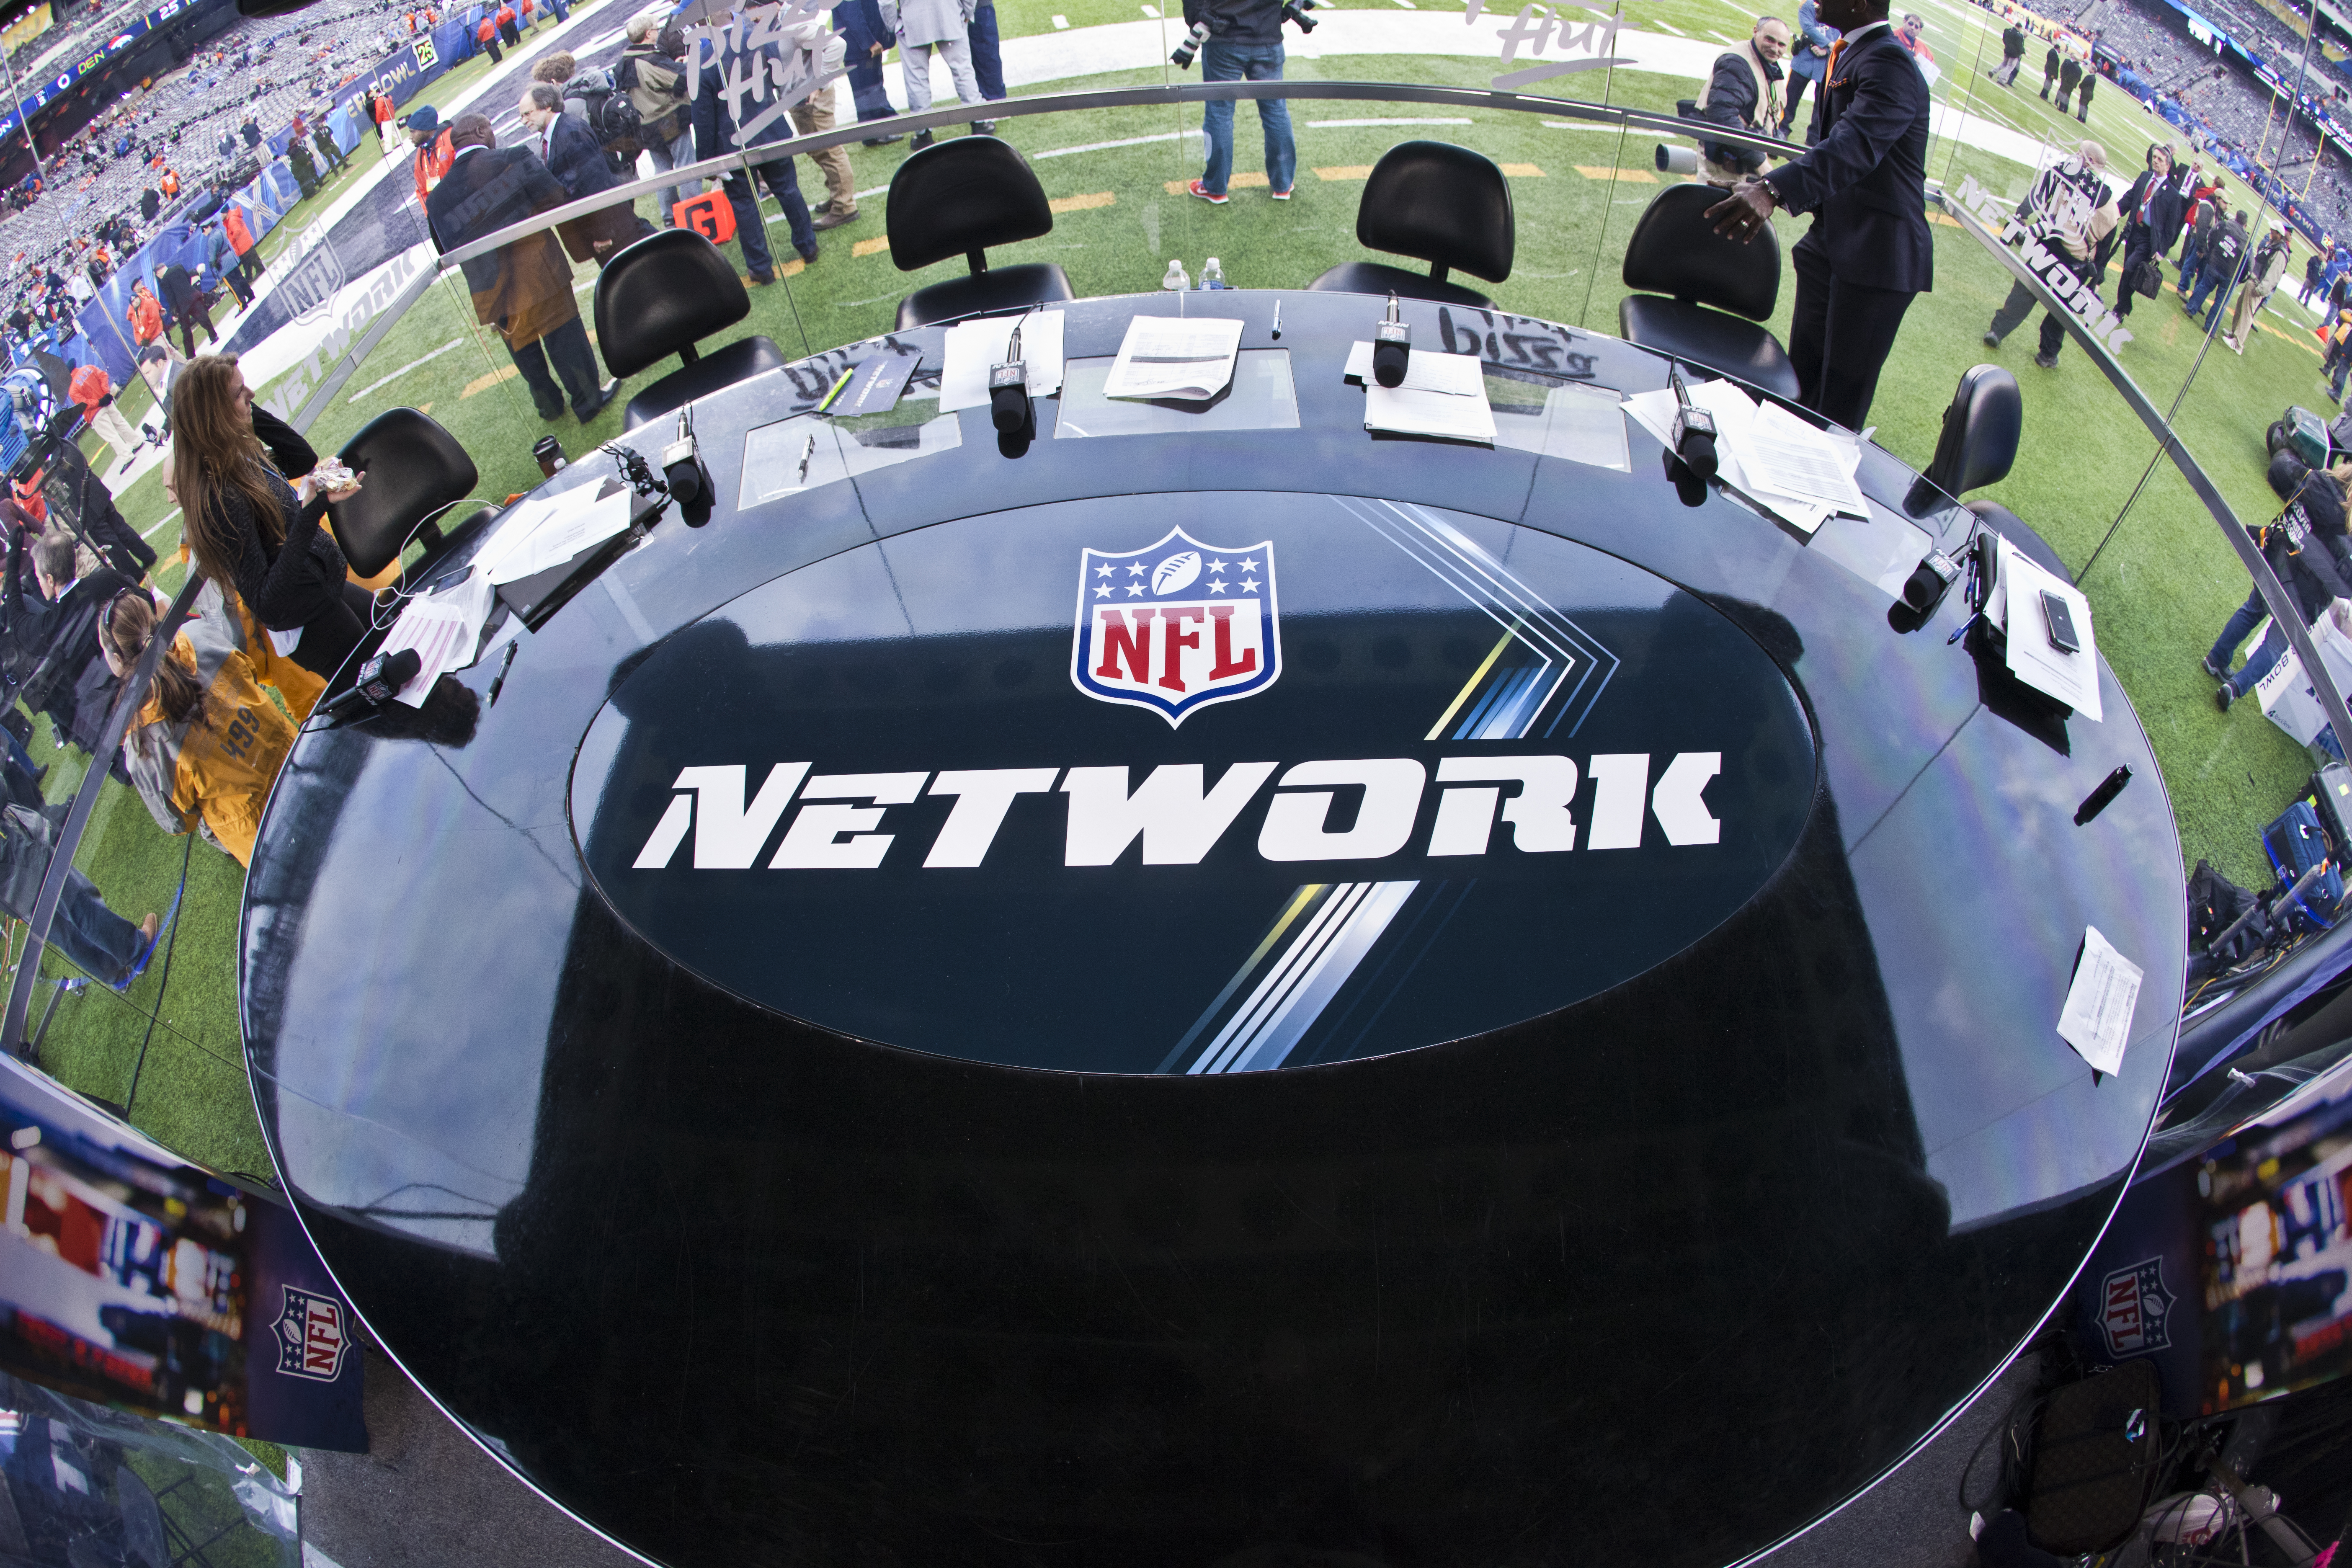 NFL schedule on  Prime: How to watch Thursday Night Football -  College Football HQ